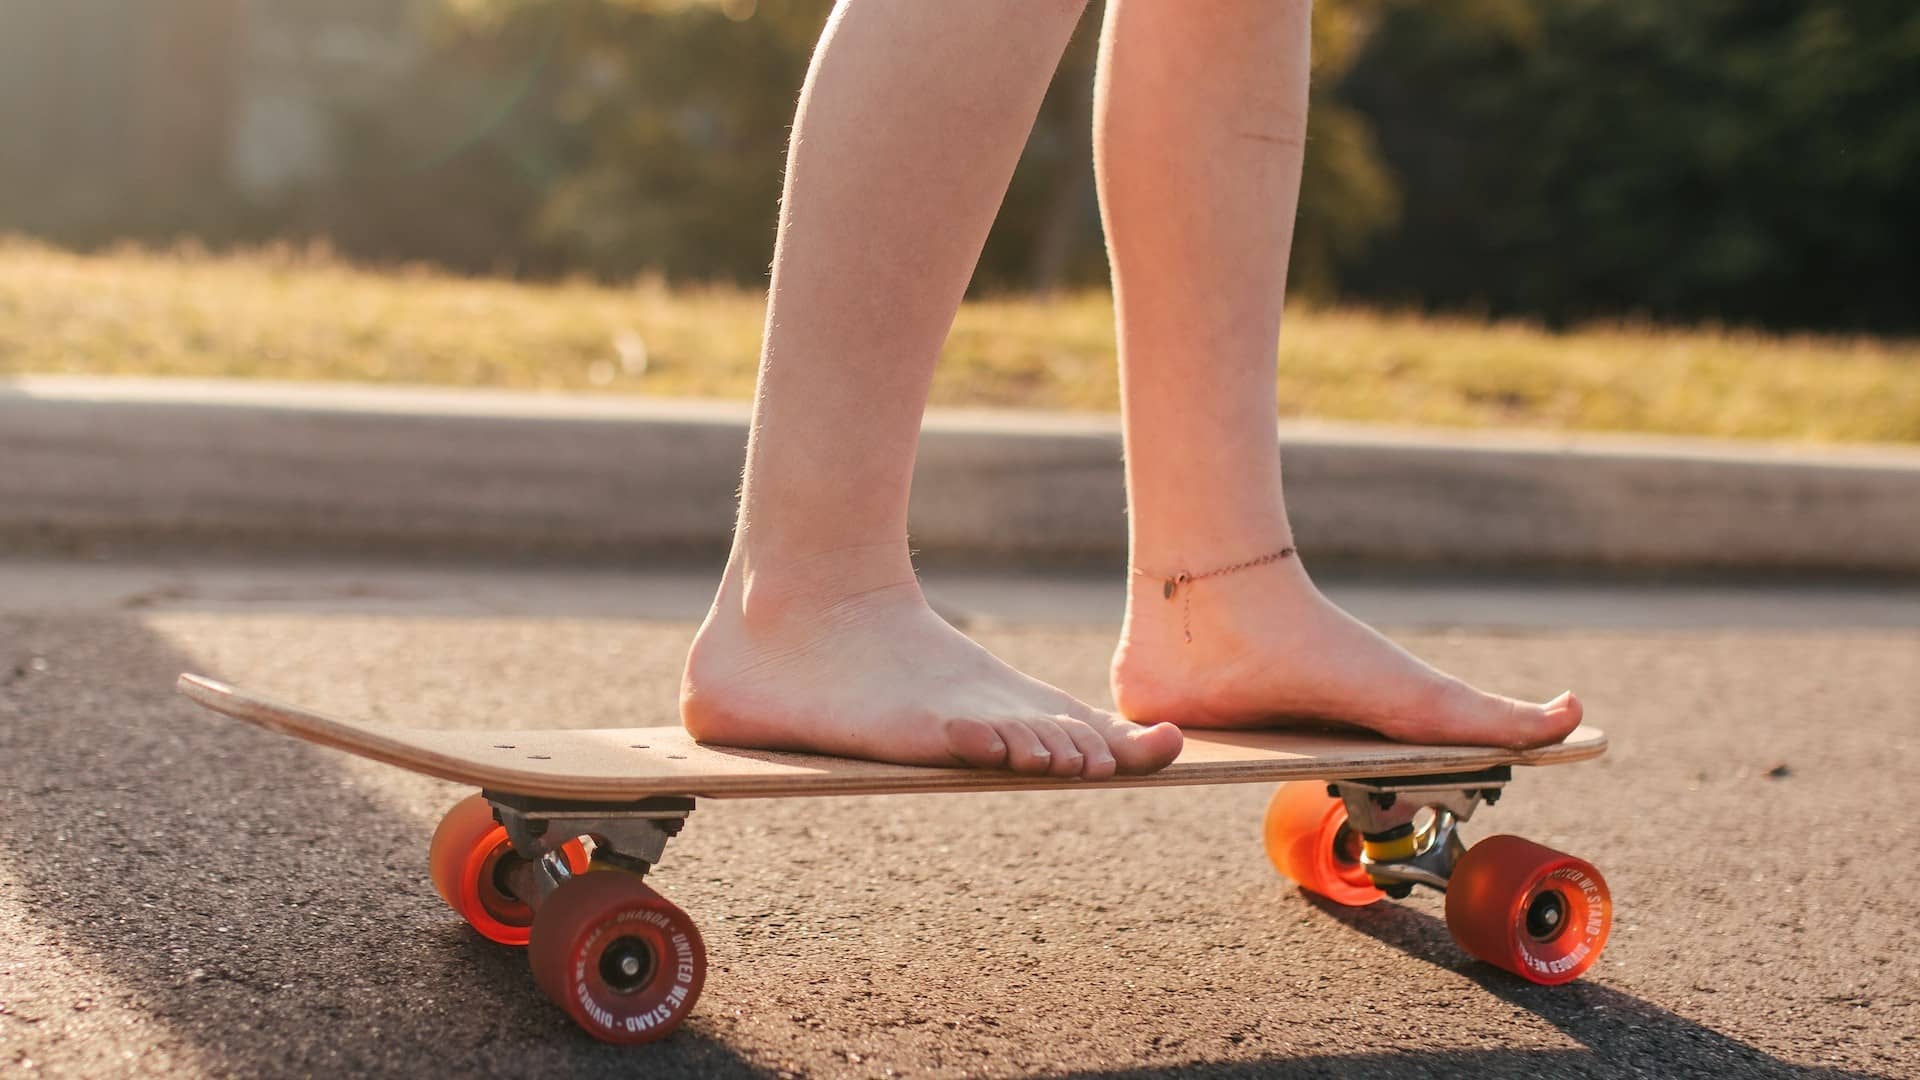 Image: A person skateboarding barefoot